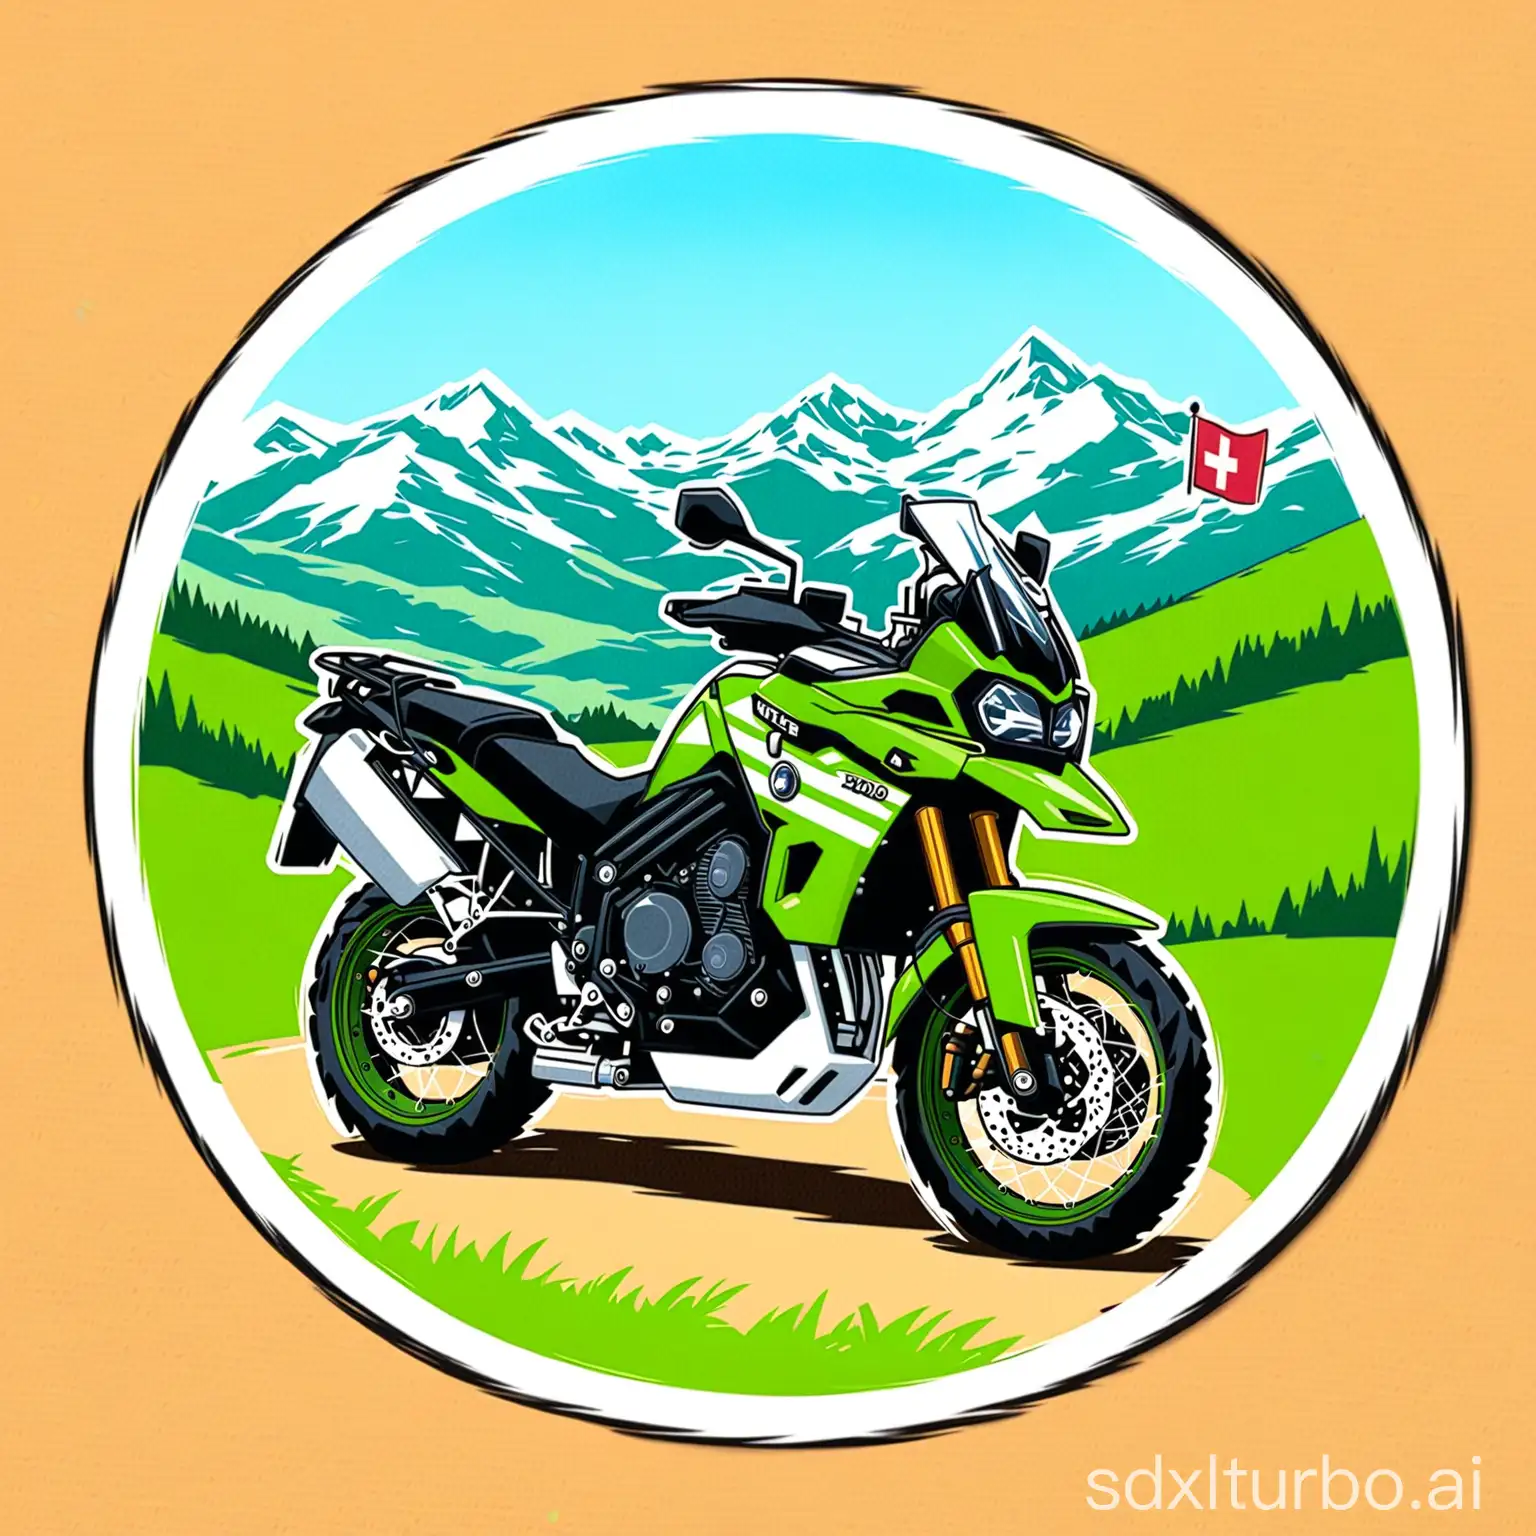 create round sticker containing mountains, the swiss flag and a olive green triumph tiger 900 rally pro motor cycle. Containing no text at all.